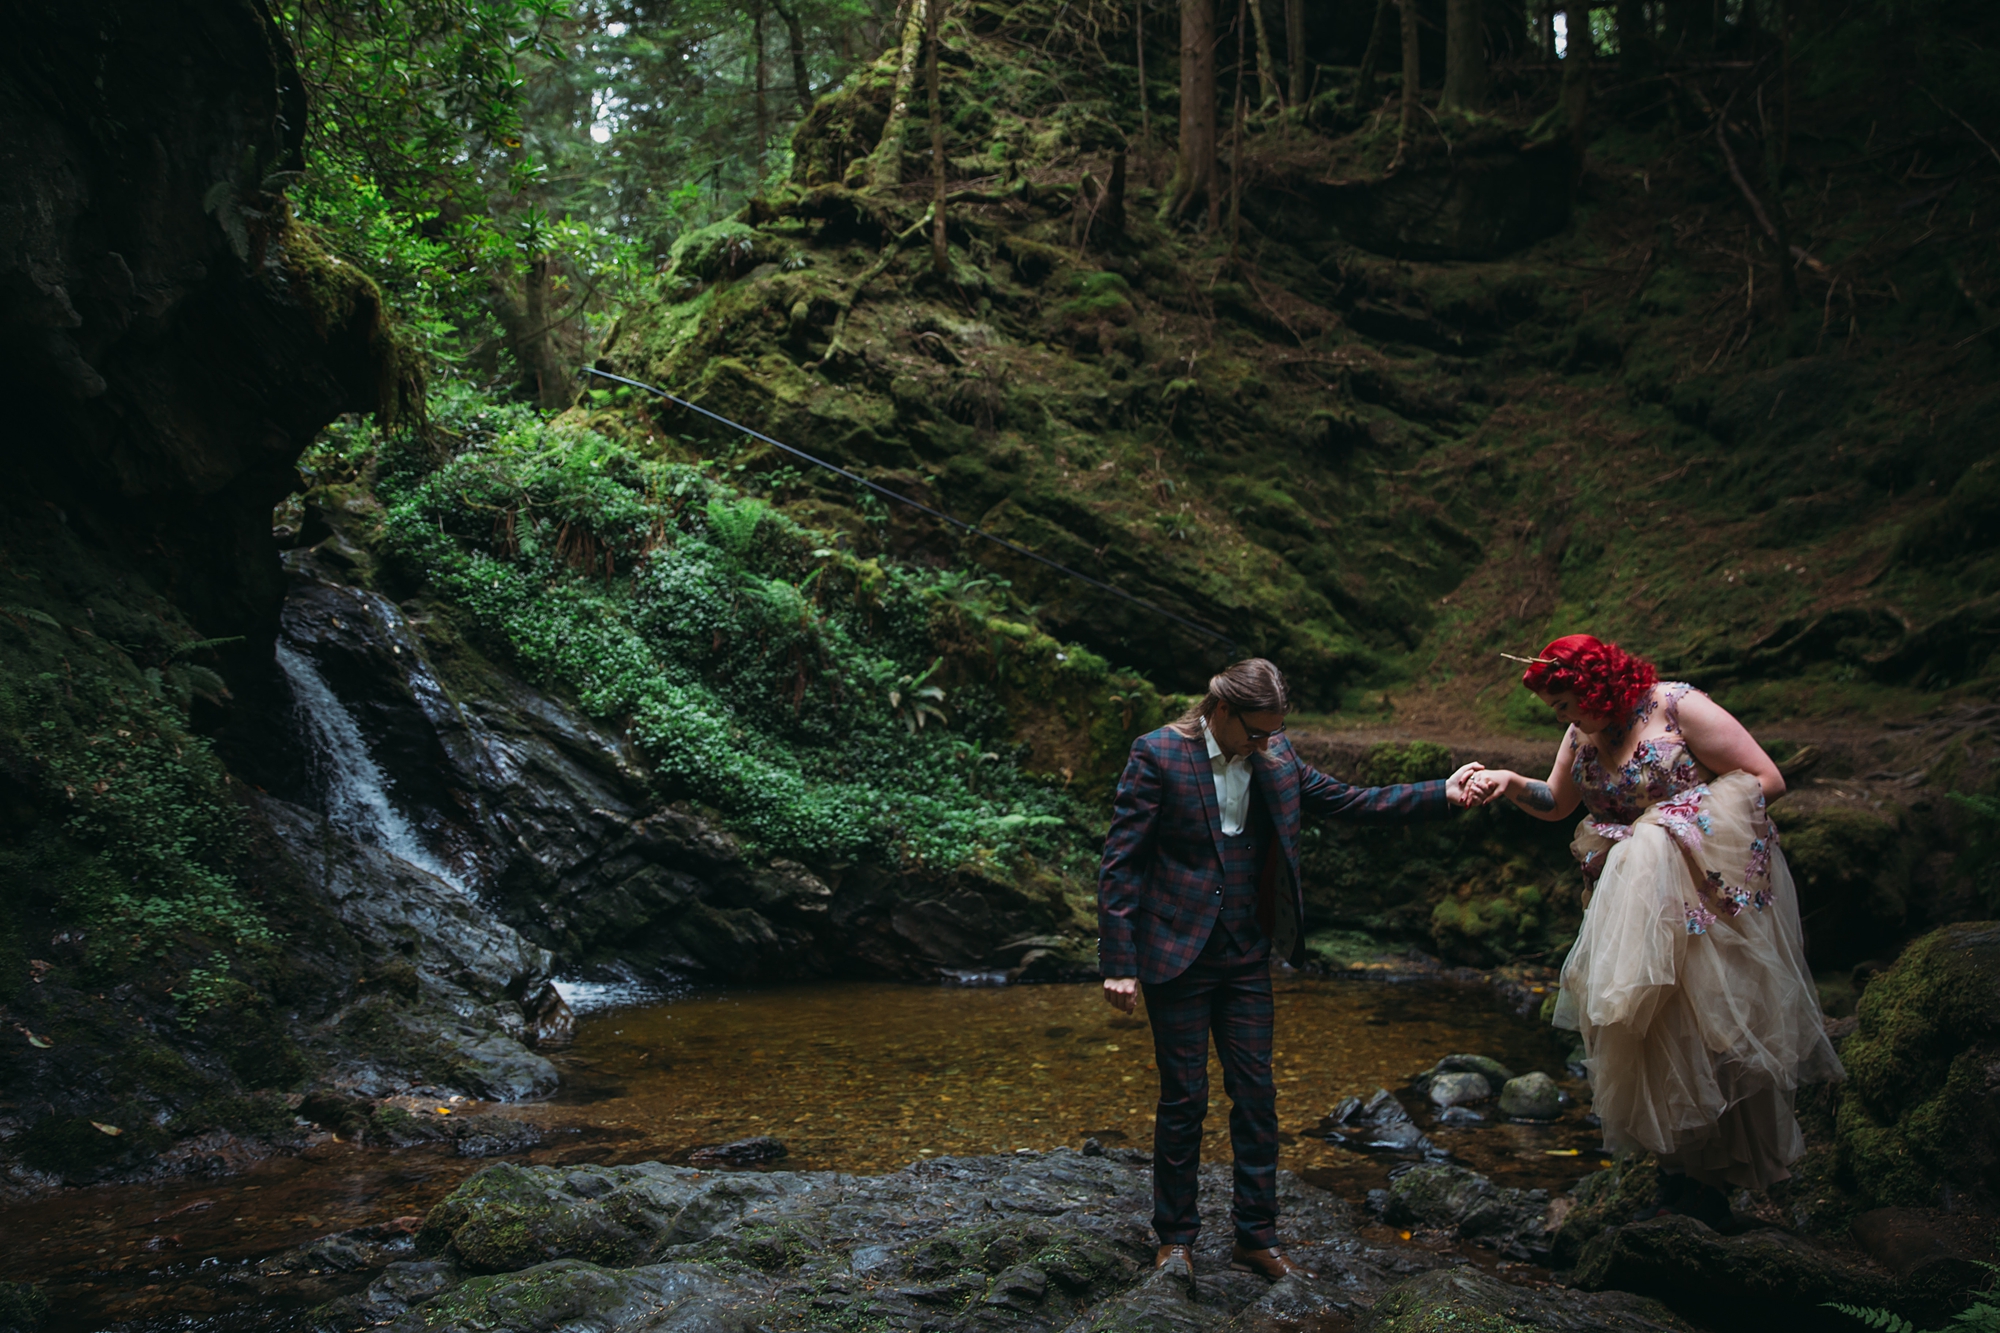 best wedding photographs of a groom helping his bride down to a waterfall